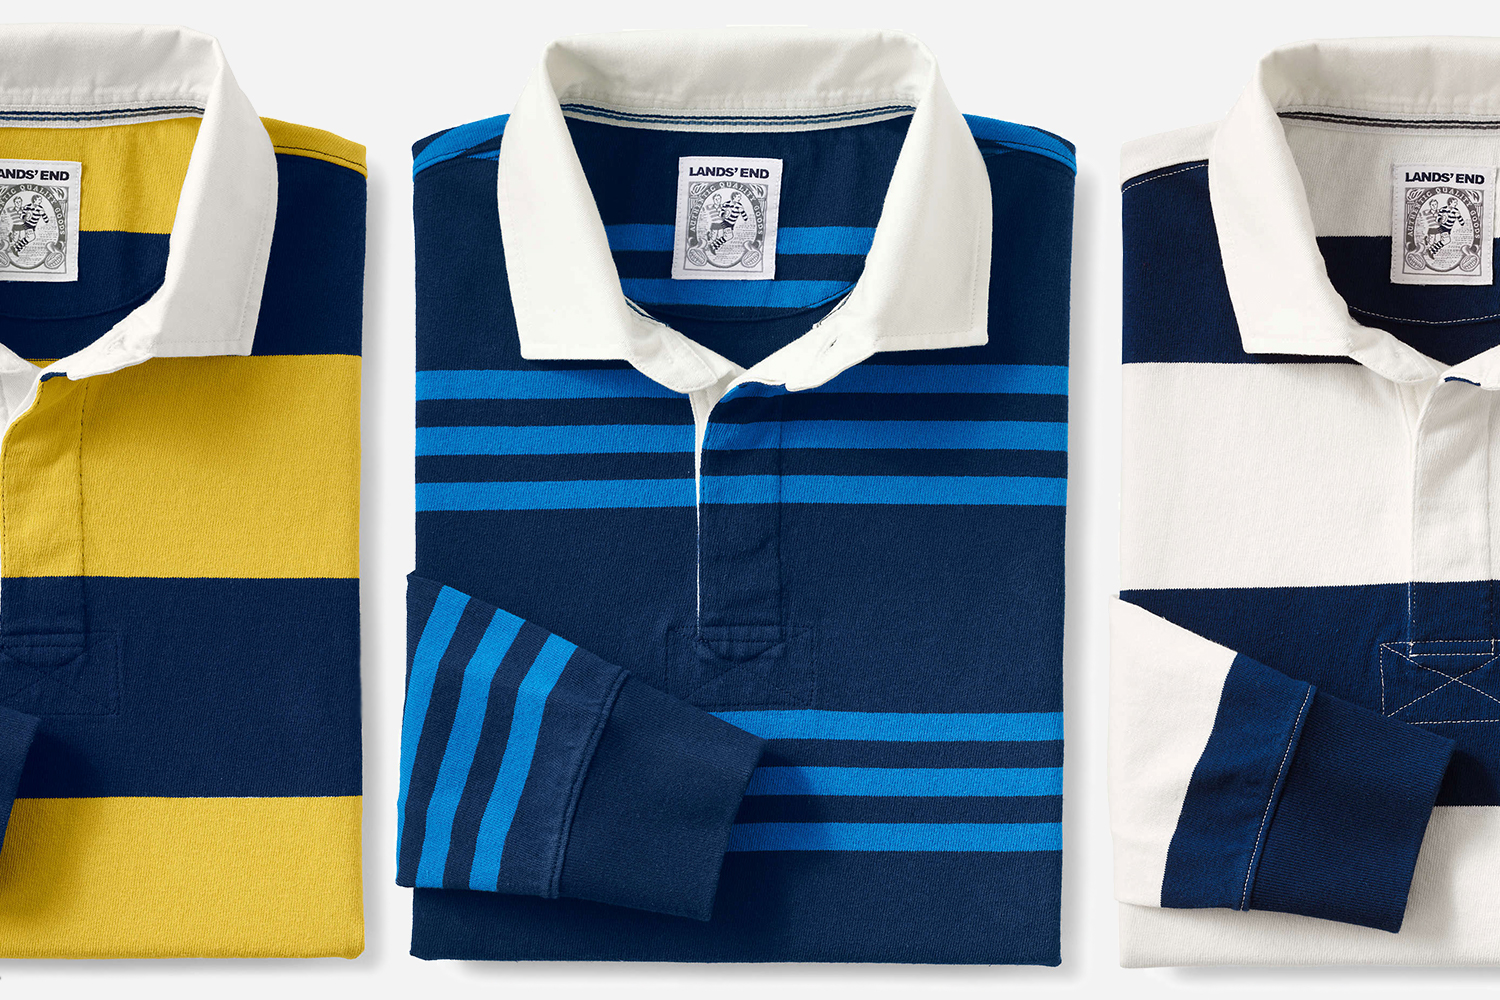 Lands' End Rugby Shirts